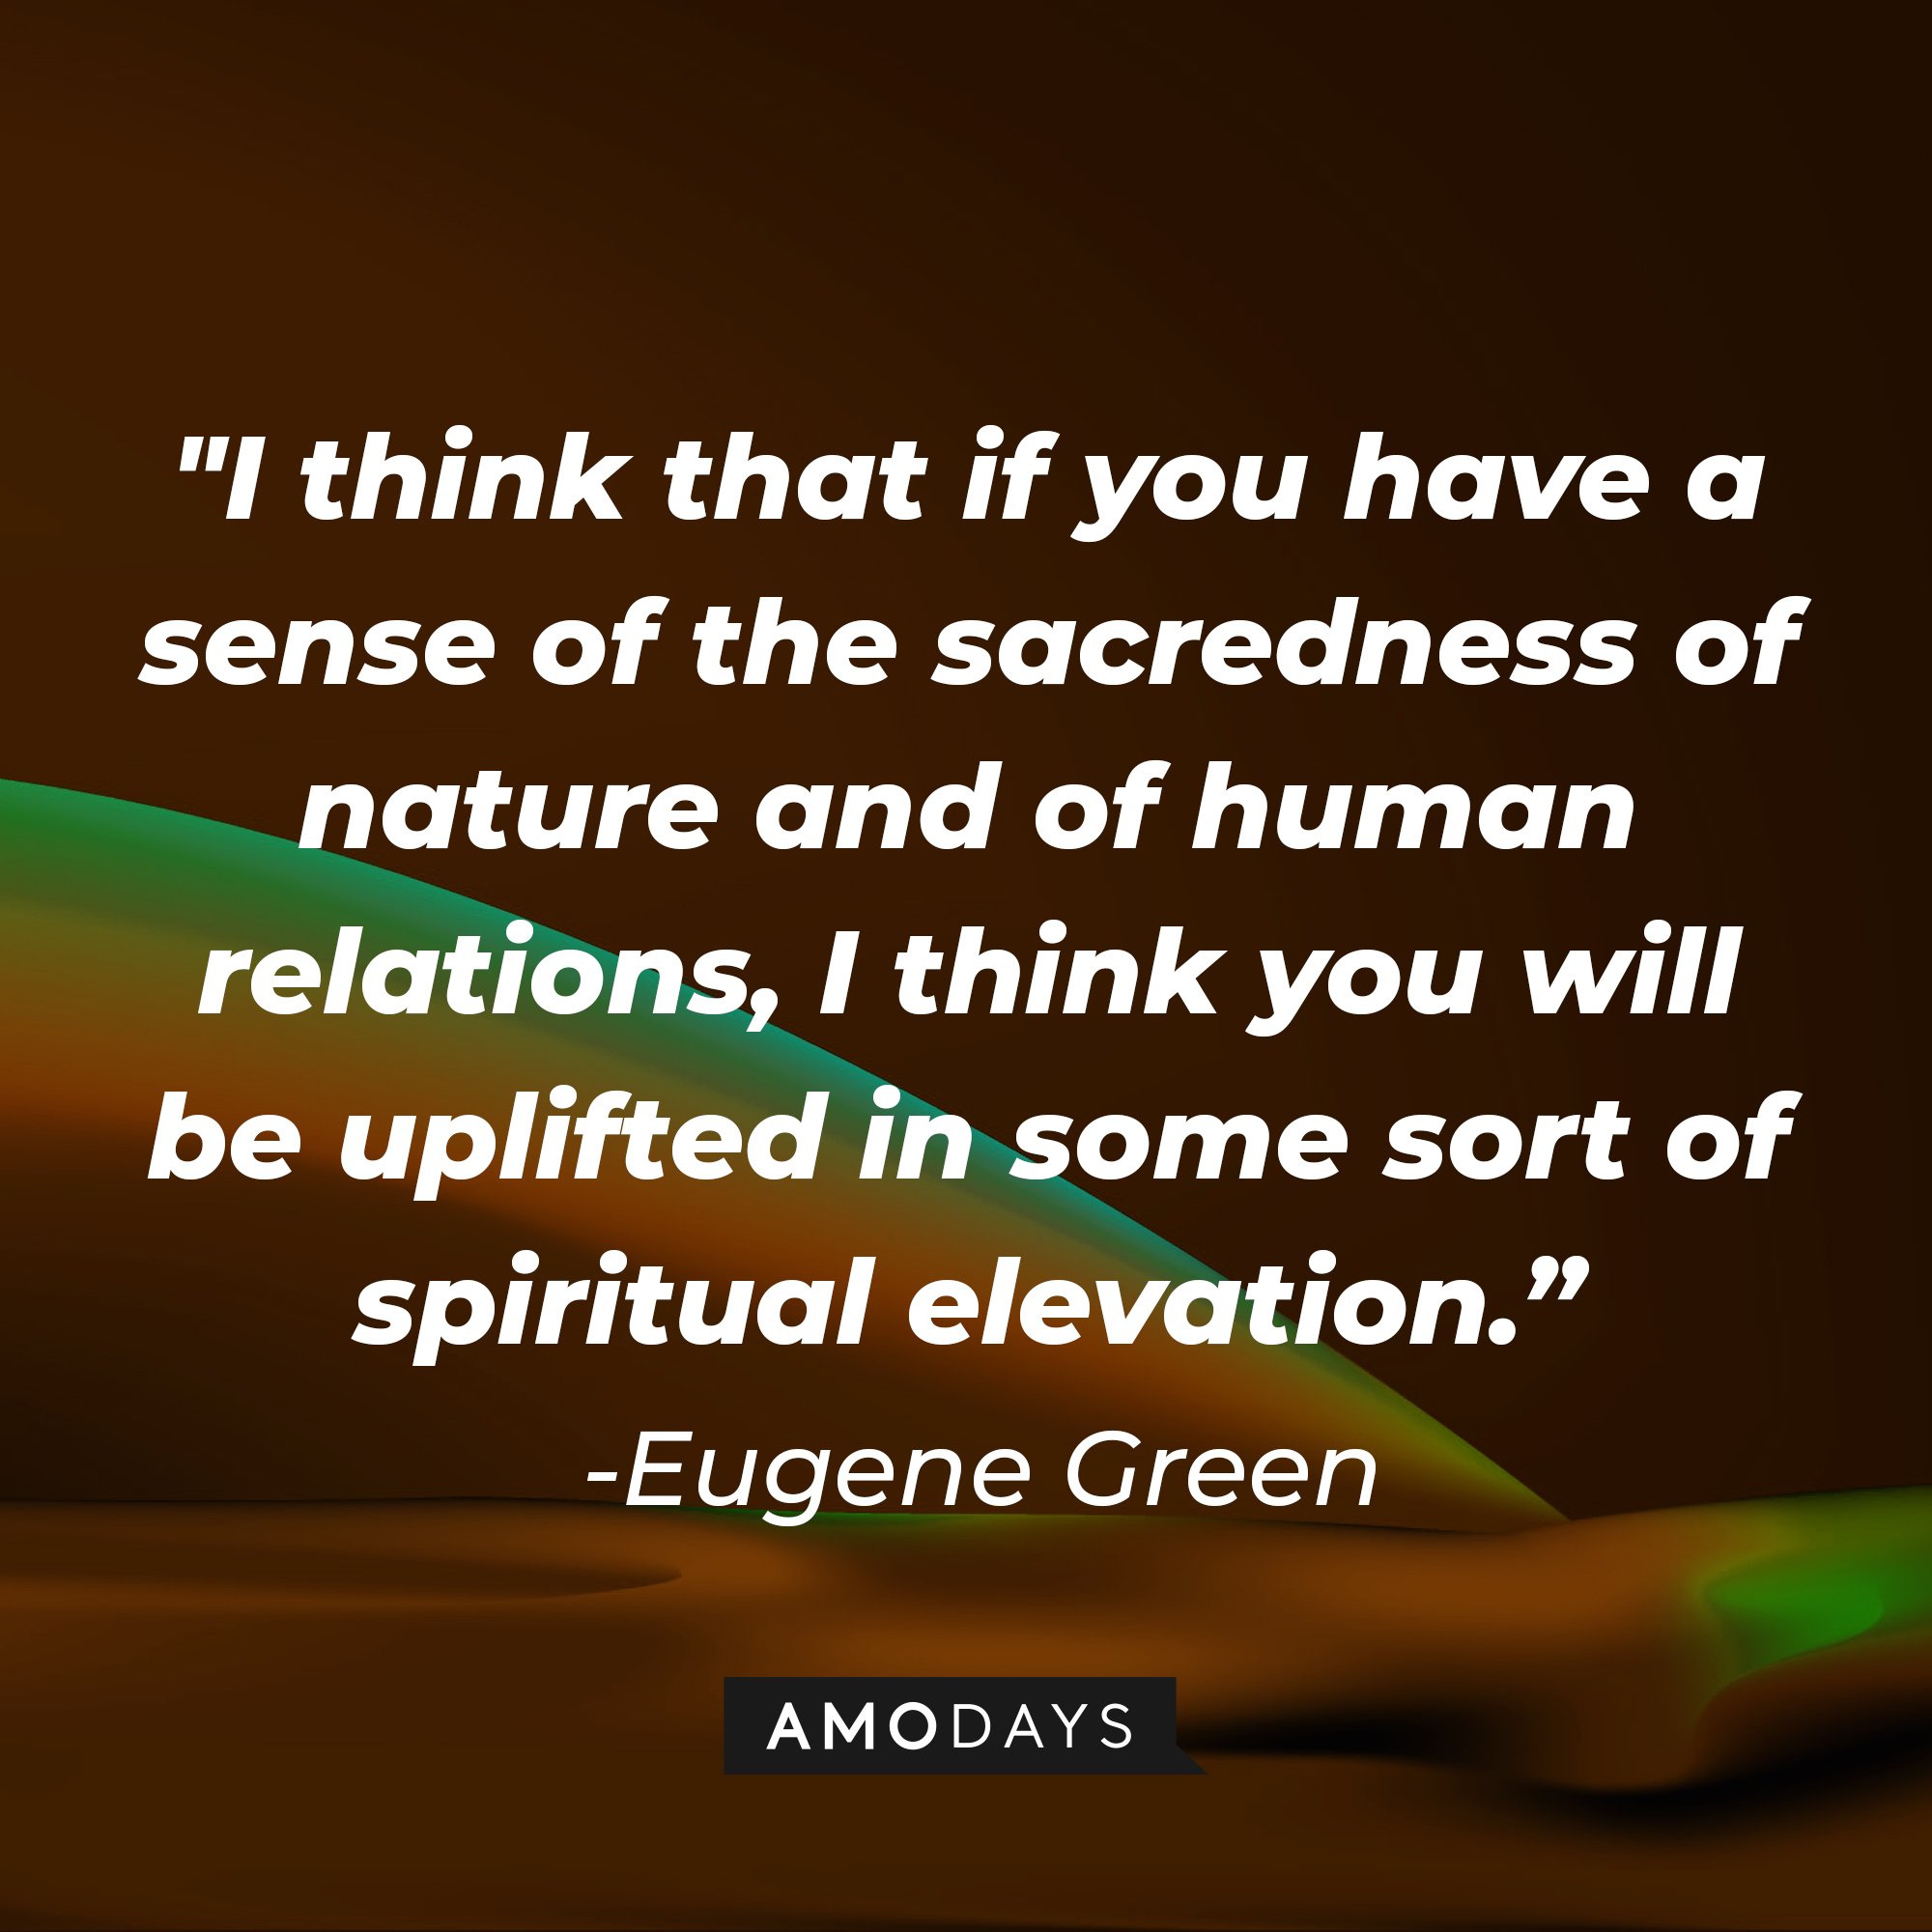 Eugene Green’s quote: "I think that if you have a sense of the sacredness of nature and of human relations, I think you will be uplifted in some sort of spiritual elevation." | Image: AmoDays